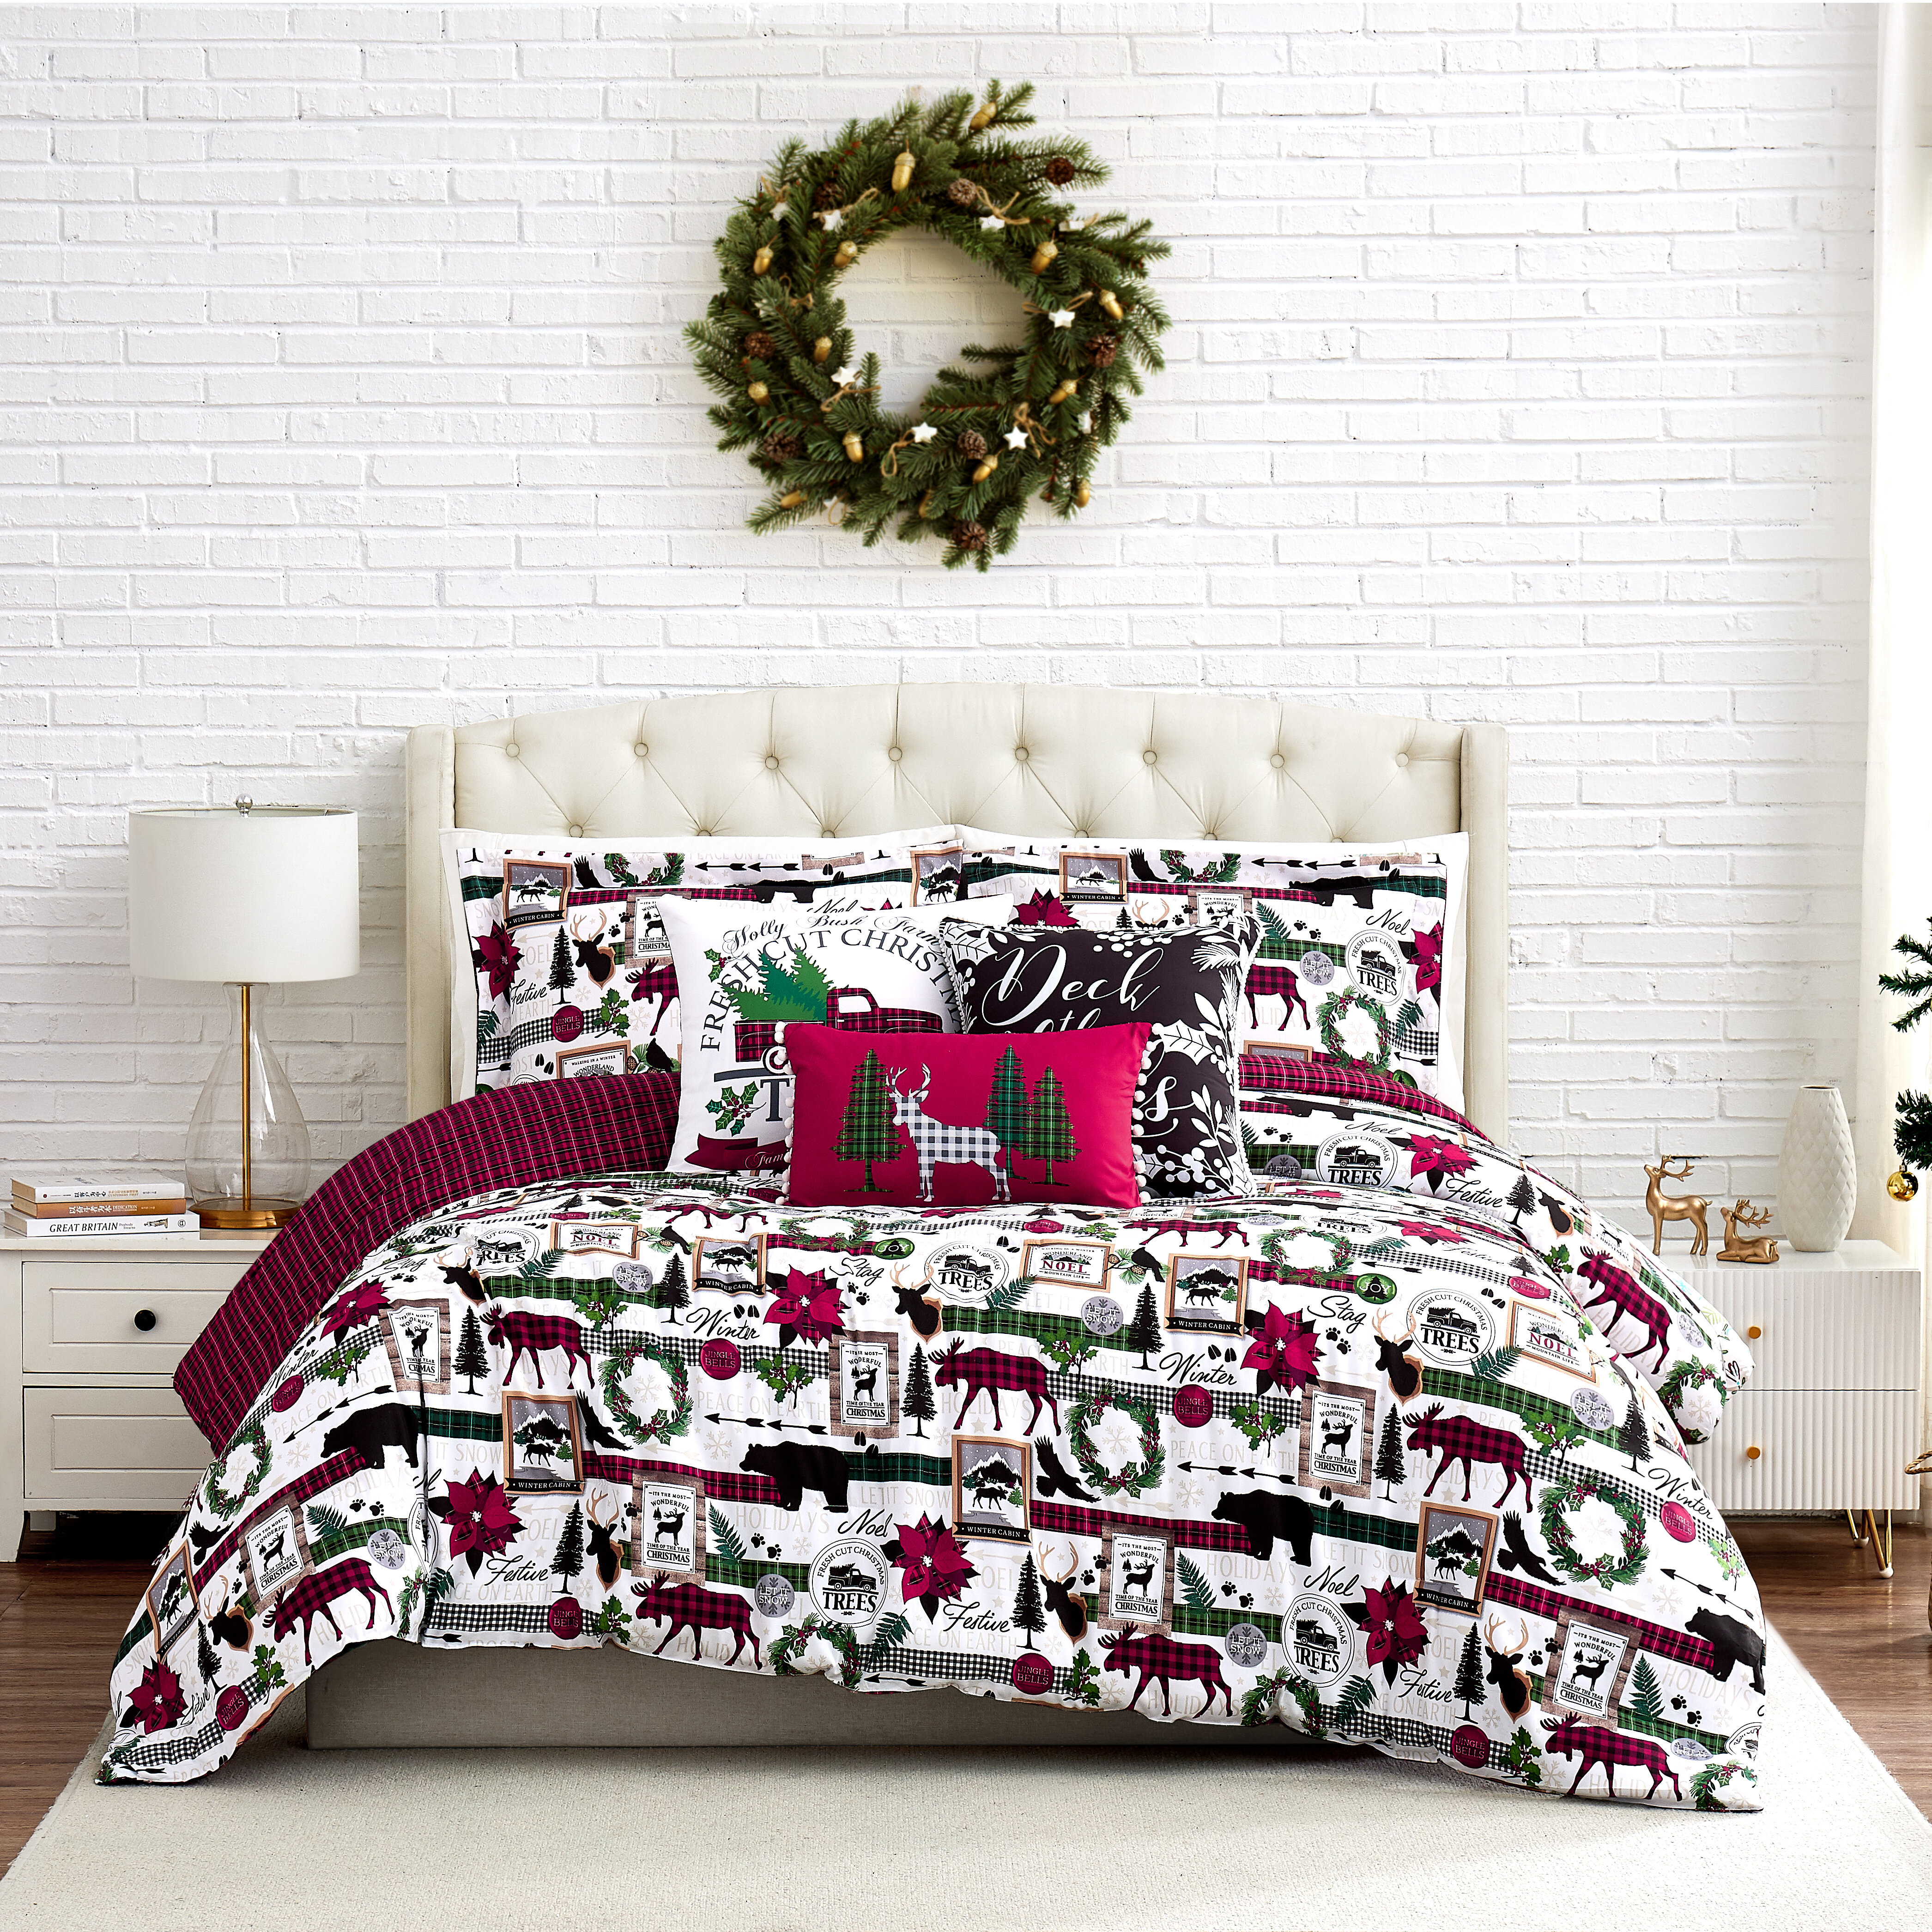 Winter Bedspread Set Queen Size, Winter Scene with Deer Frozen Trees and  Snow Christmas Season Pine Trees Bushes, Quilted 3 Piece Decor Coverlet Set